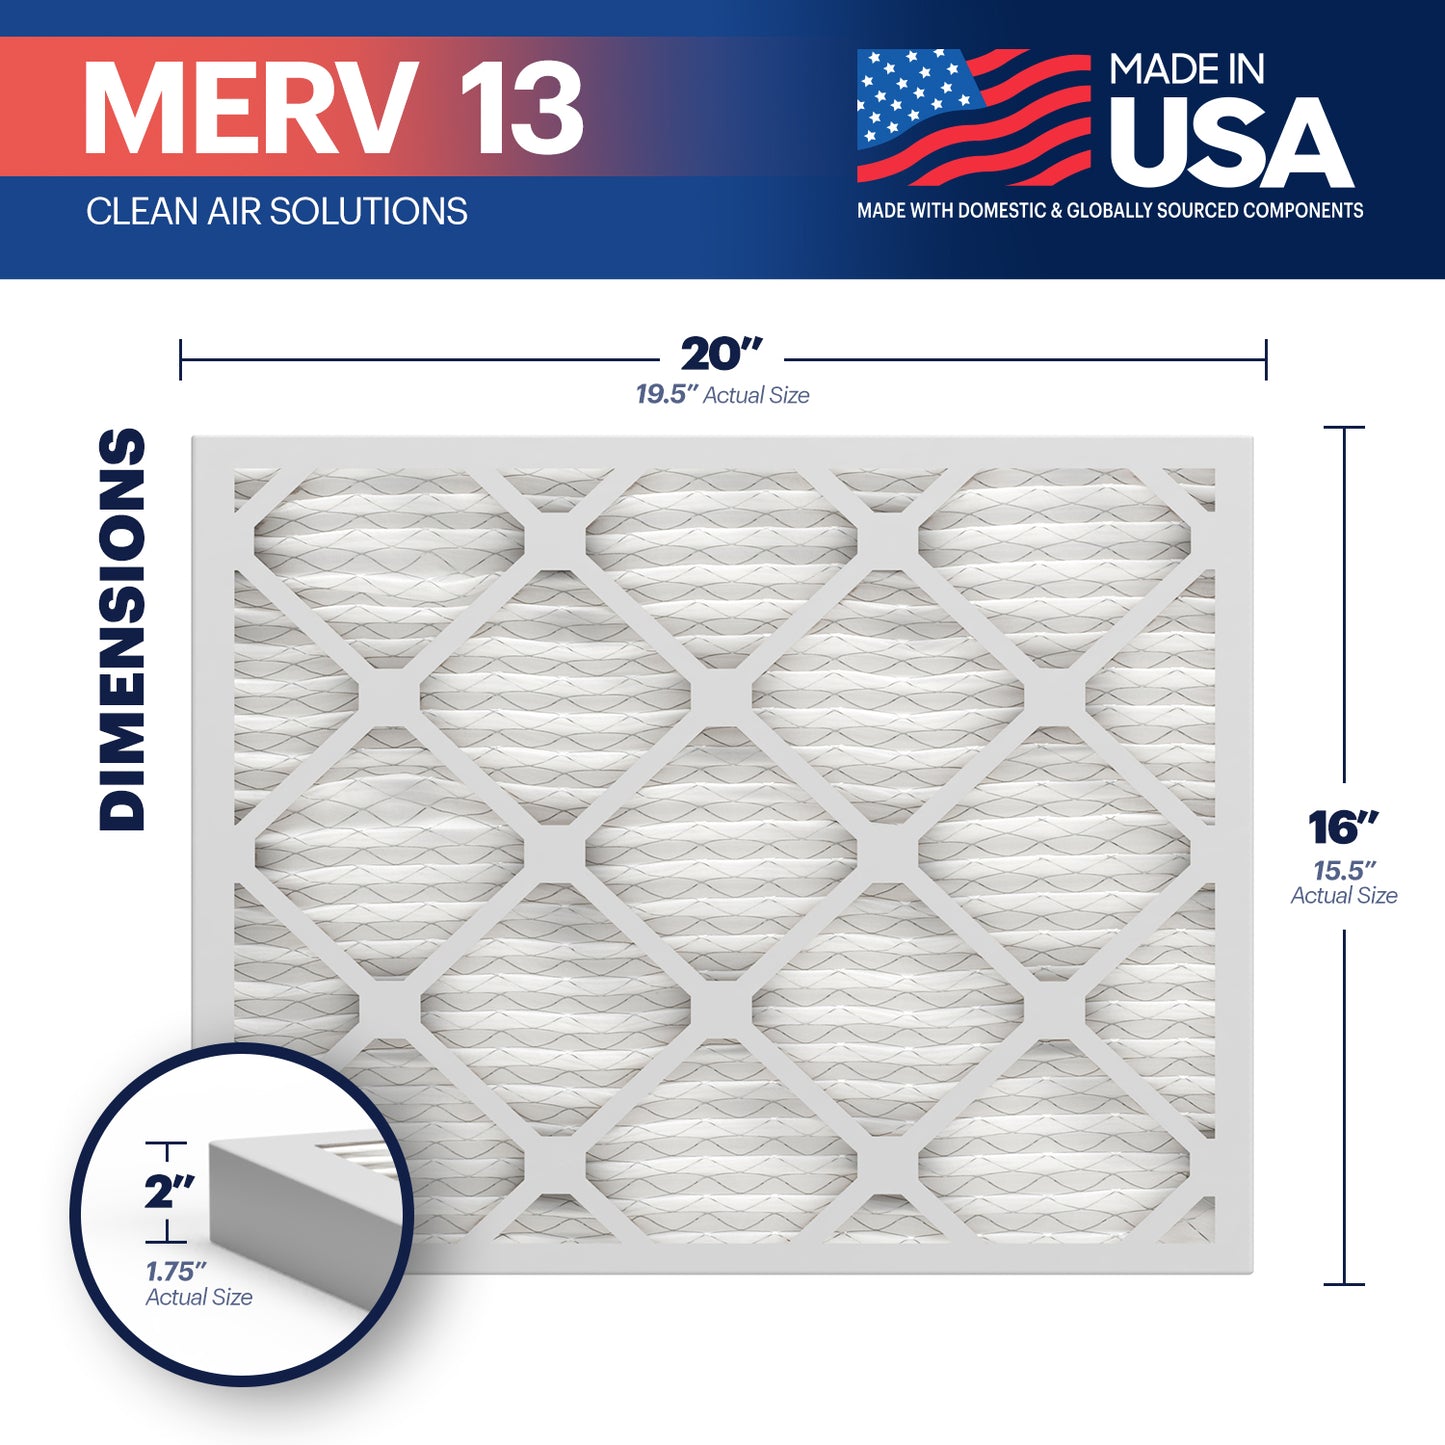 BNX TruFilter 16x20x2 MERV 13 Pleated Air Filter – Made in USA (4-Pack)